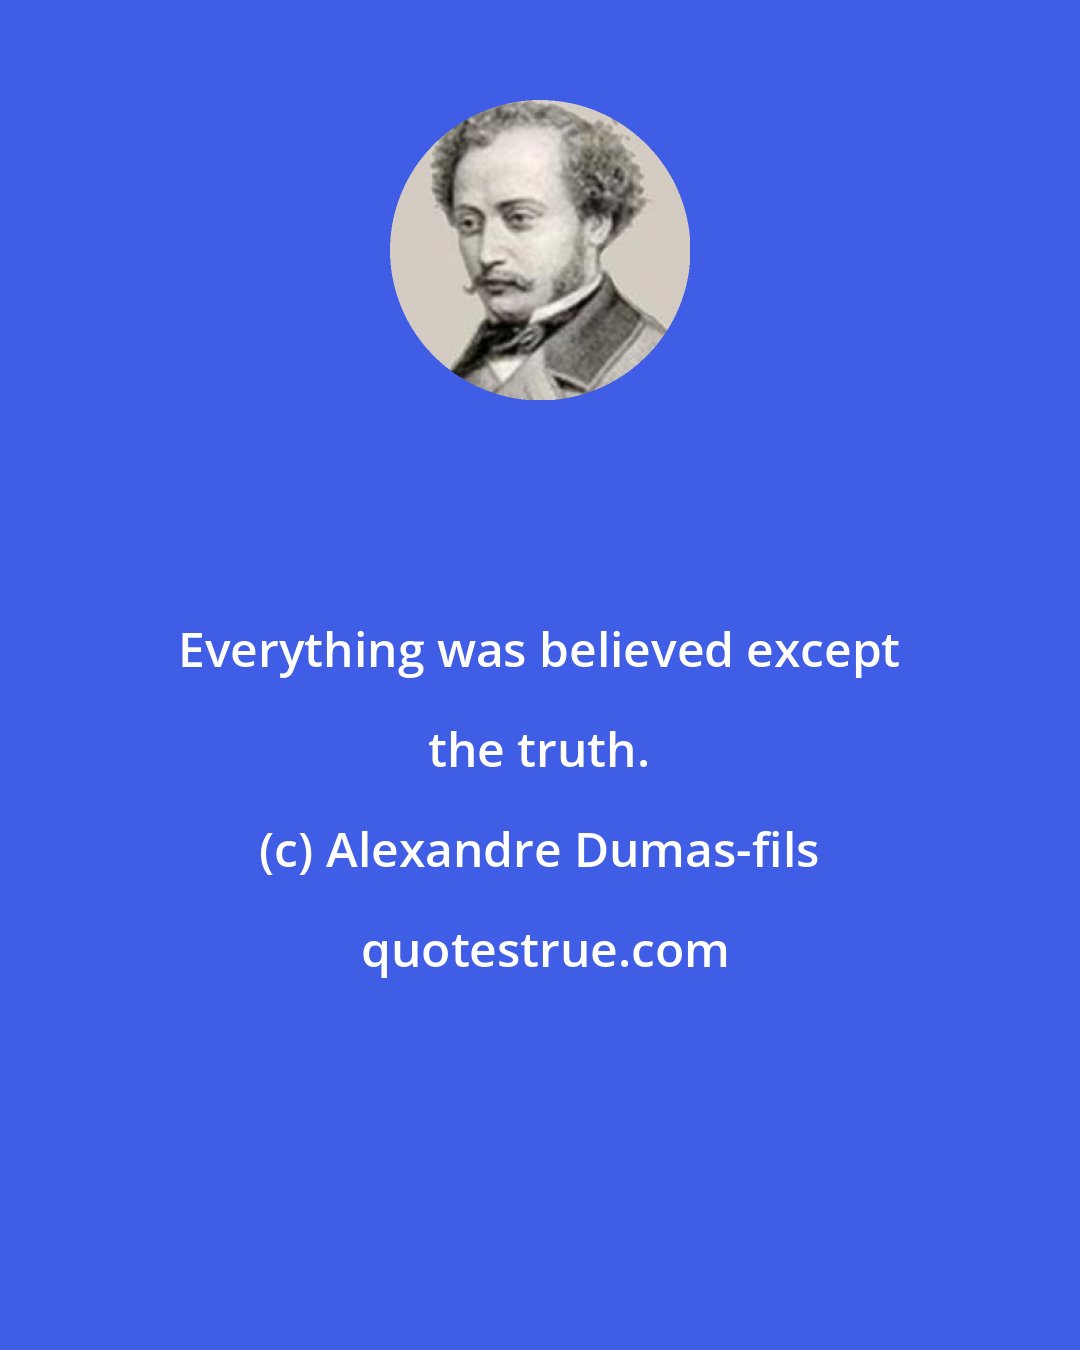 Alexandre Dumas-fils: Everything was believed except the truth.